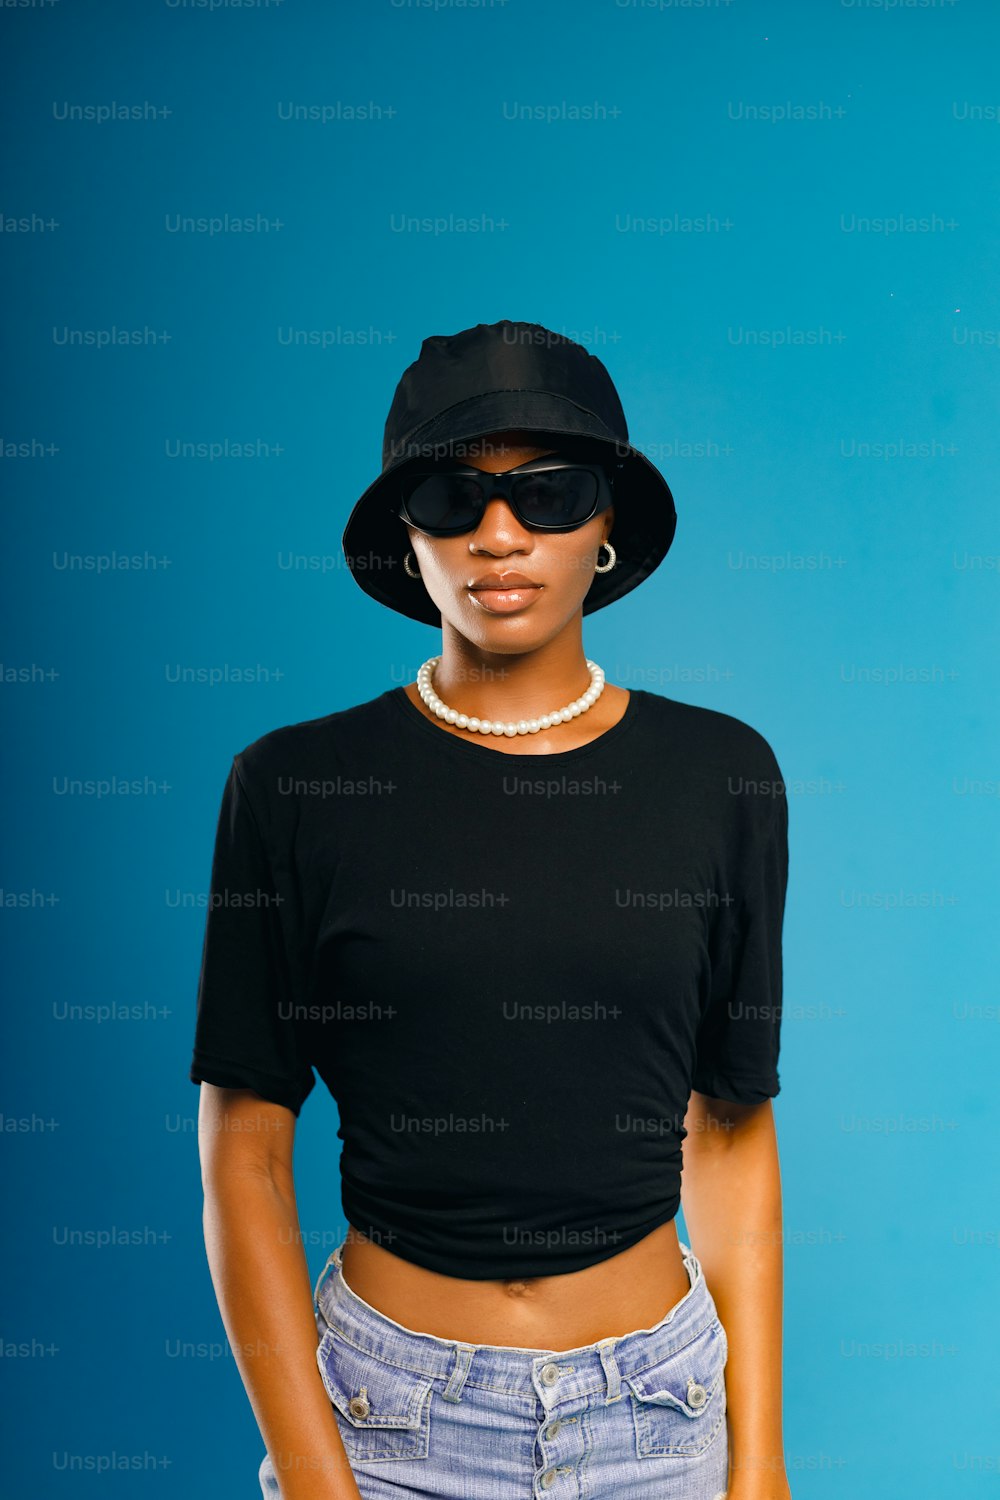 a woman wearing a black hat and sunglasses